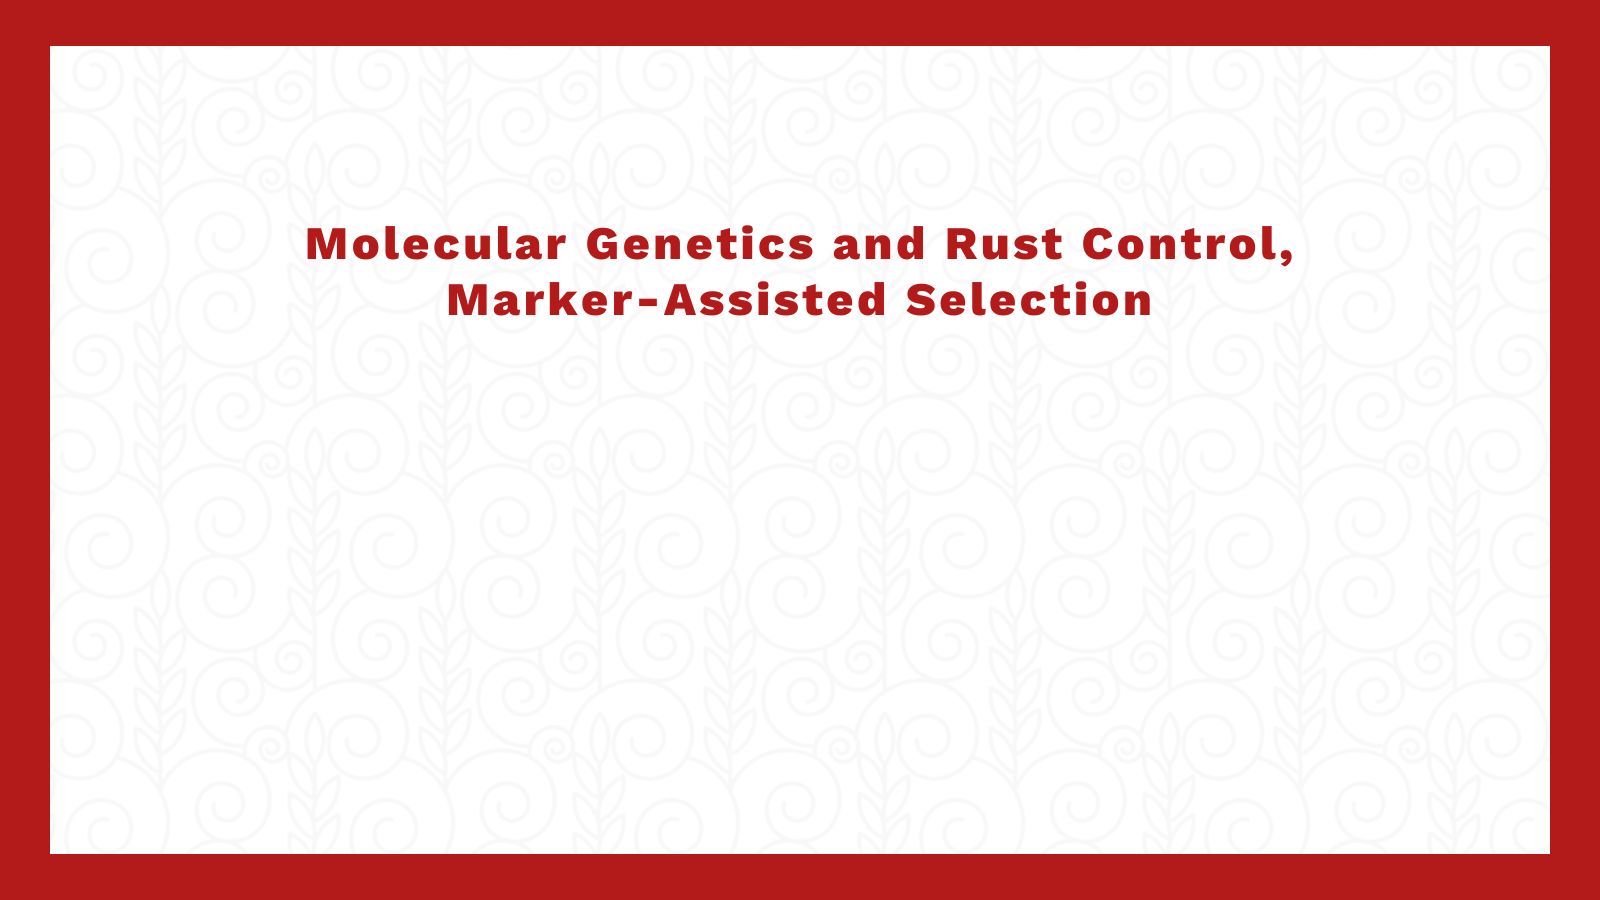 Molecular Genetics and Rust Control, Marker-Assisted Selection